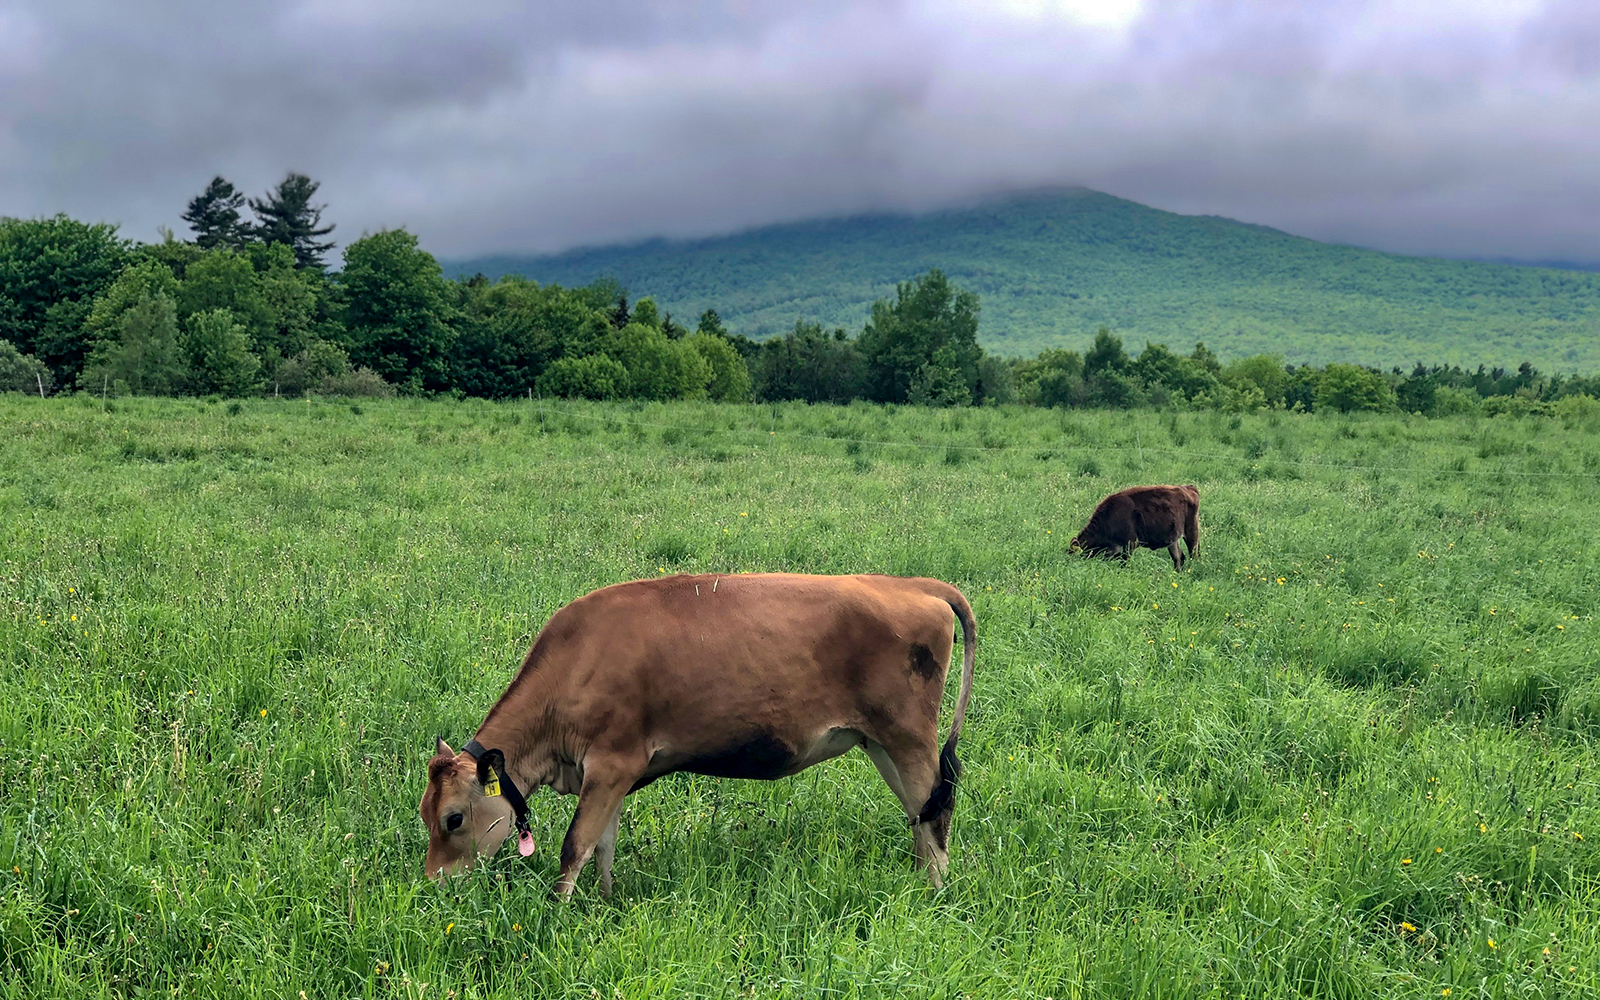 jersey cows graze in a lush green moumtain pasture as clouds roll in